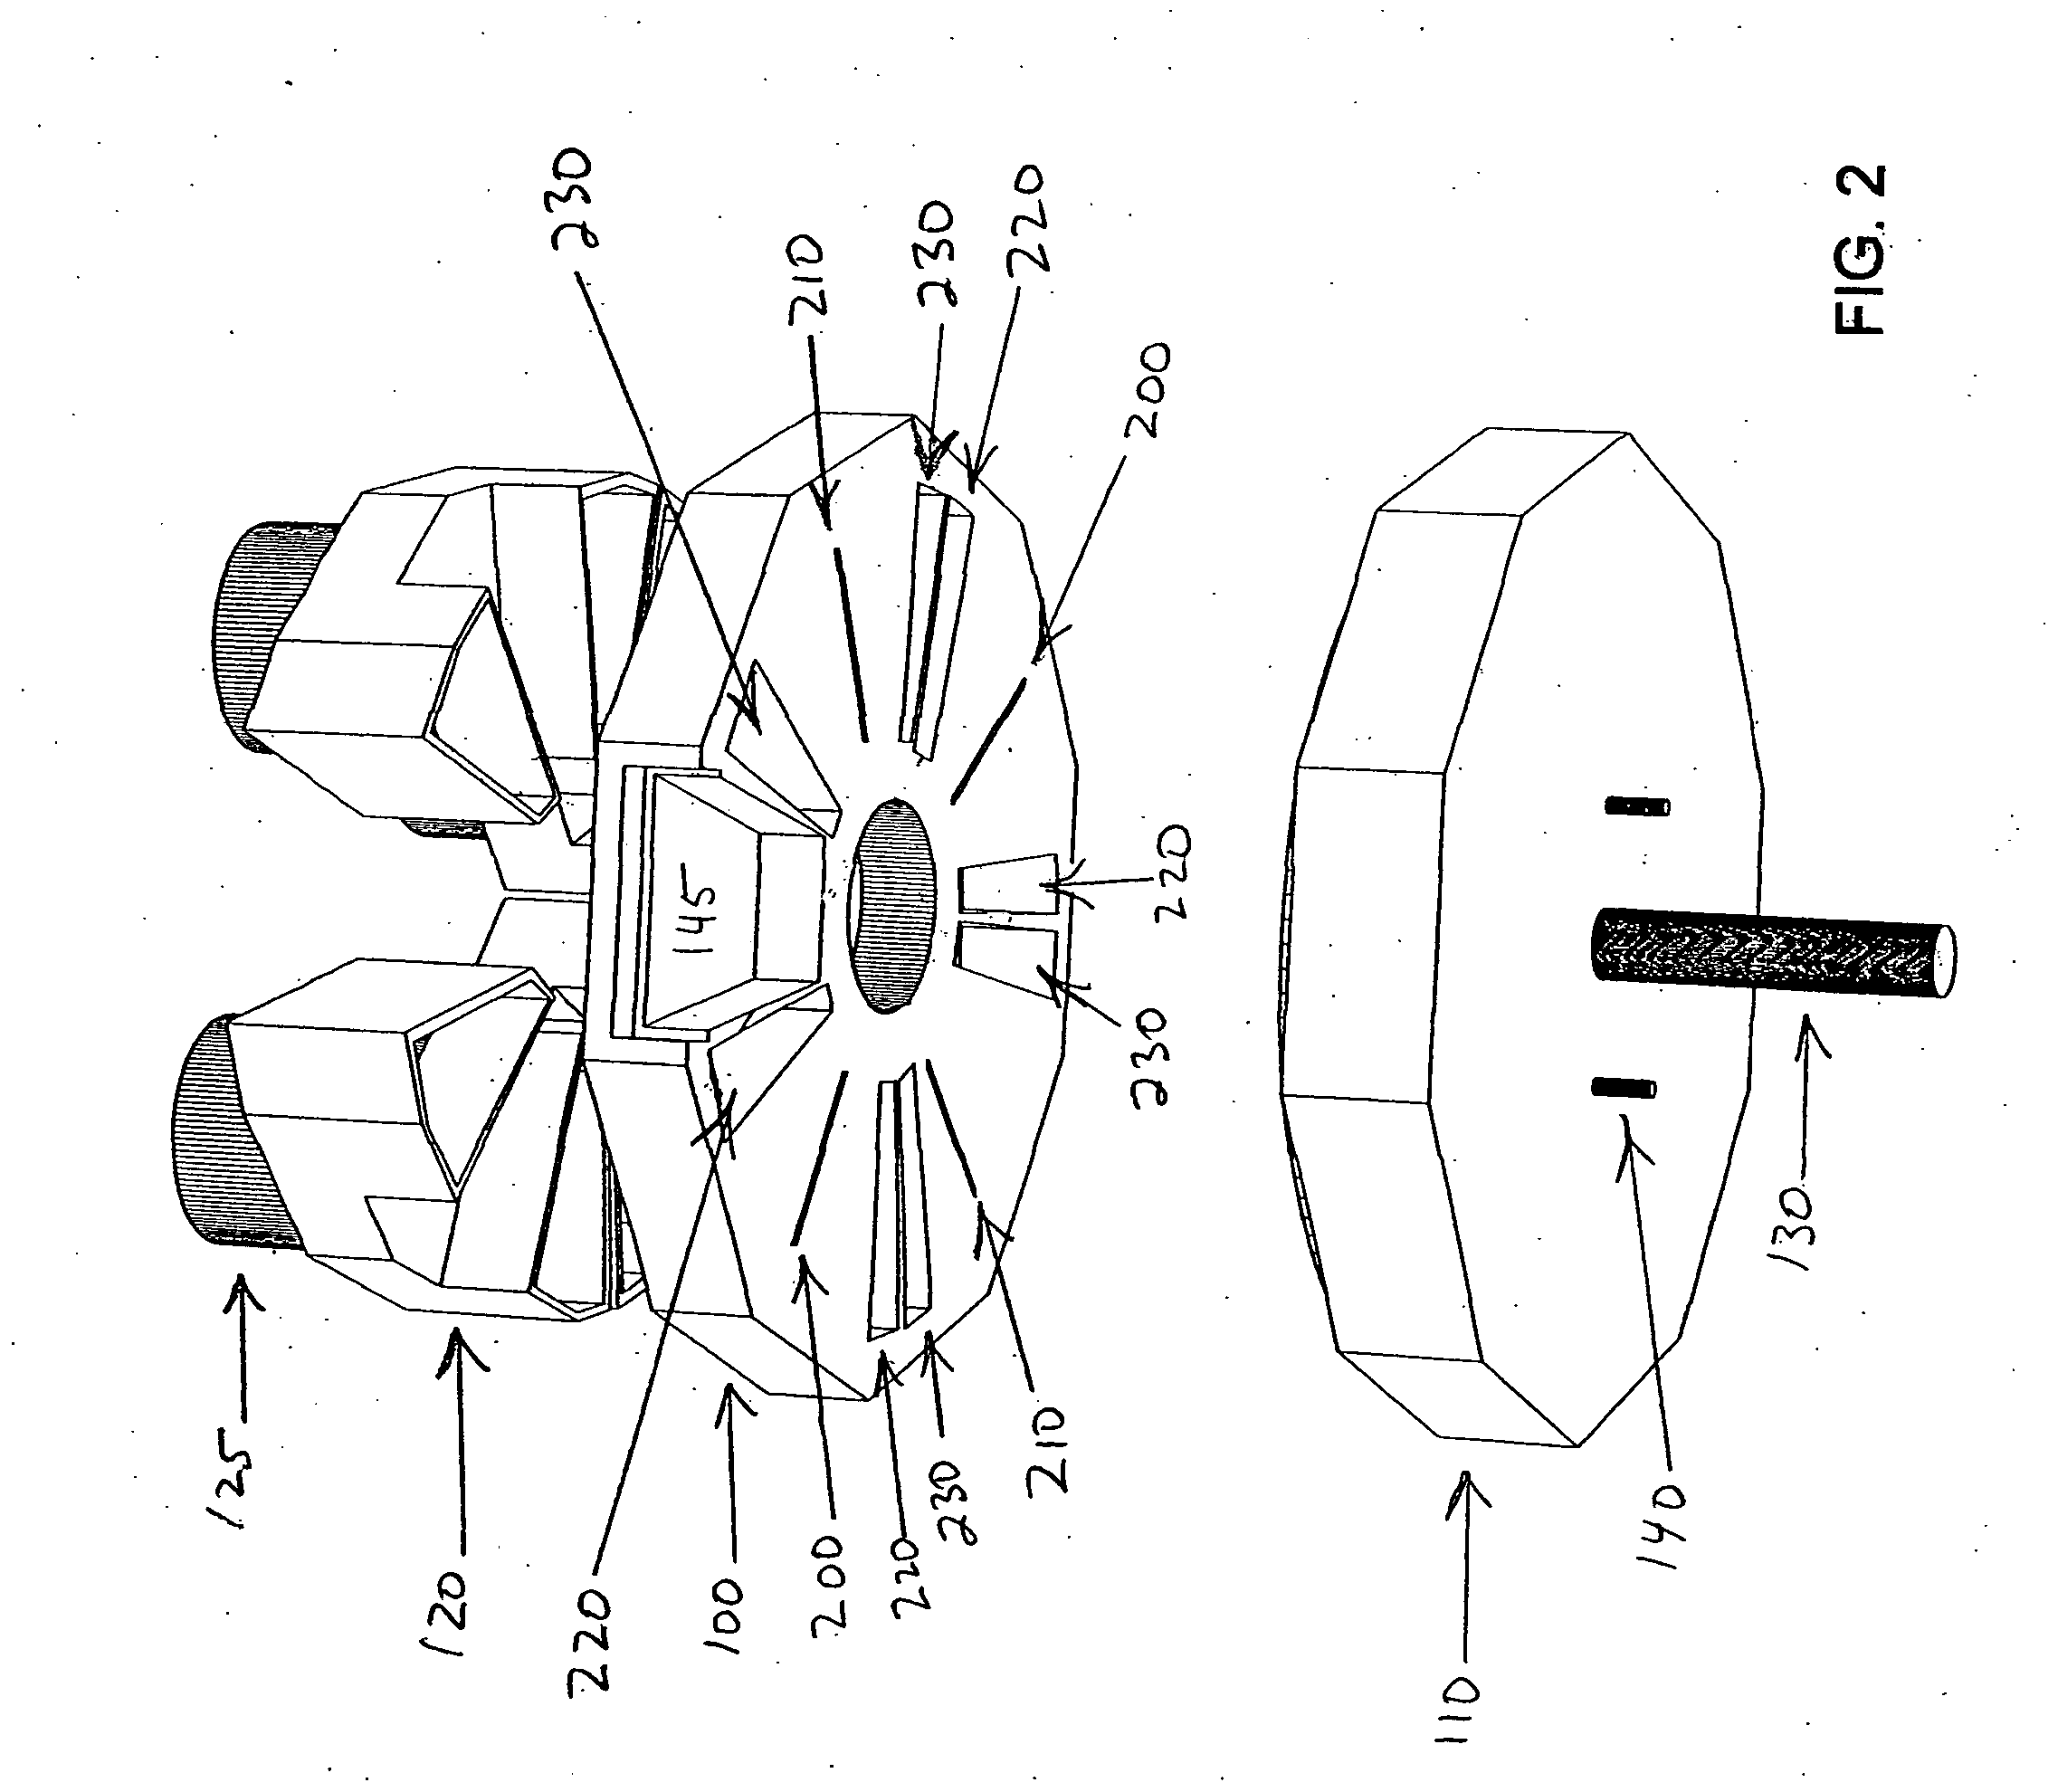 Multi-zone atomic layer deposition apparatus and method